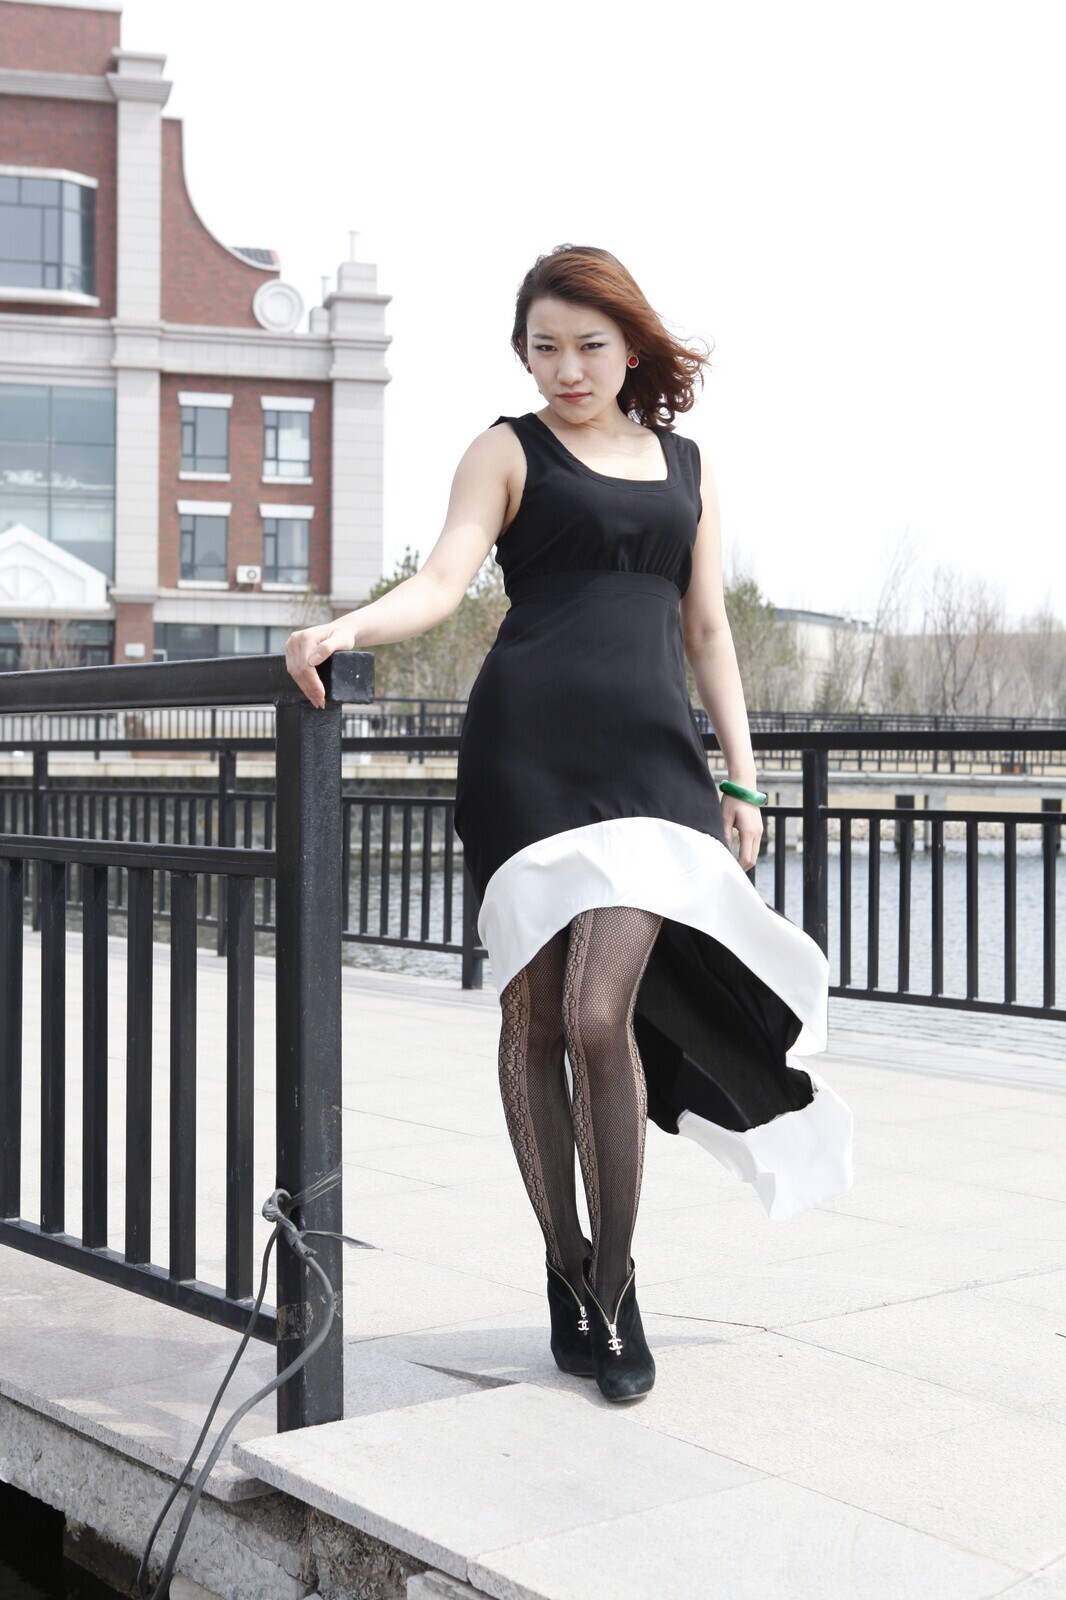 [online collection] on December 8, 2013, black skirt pattern silk stockings were enchanting and sexy